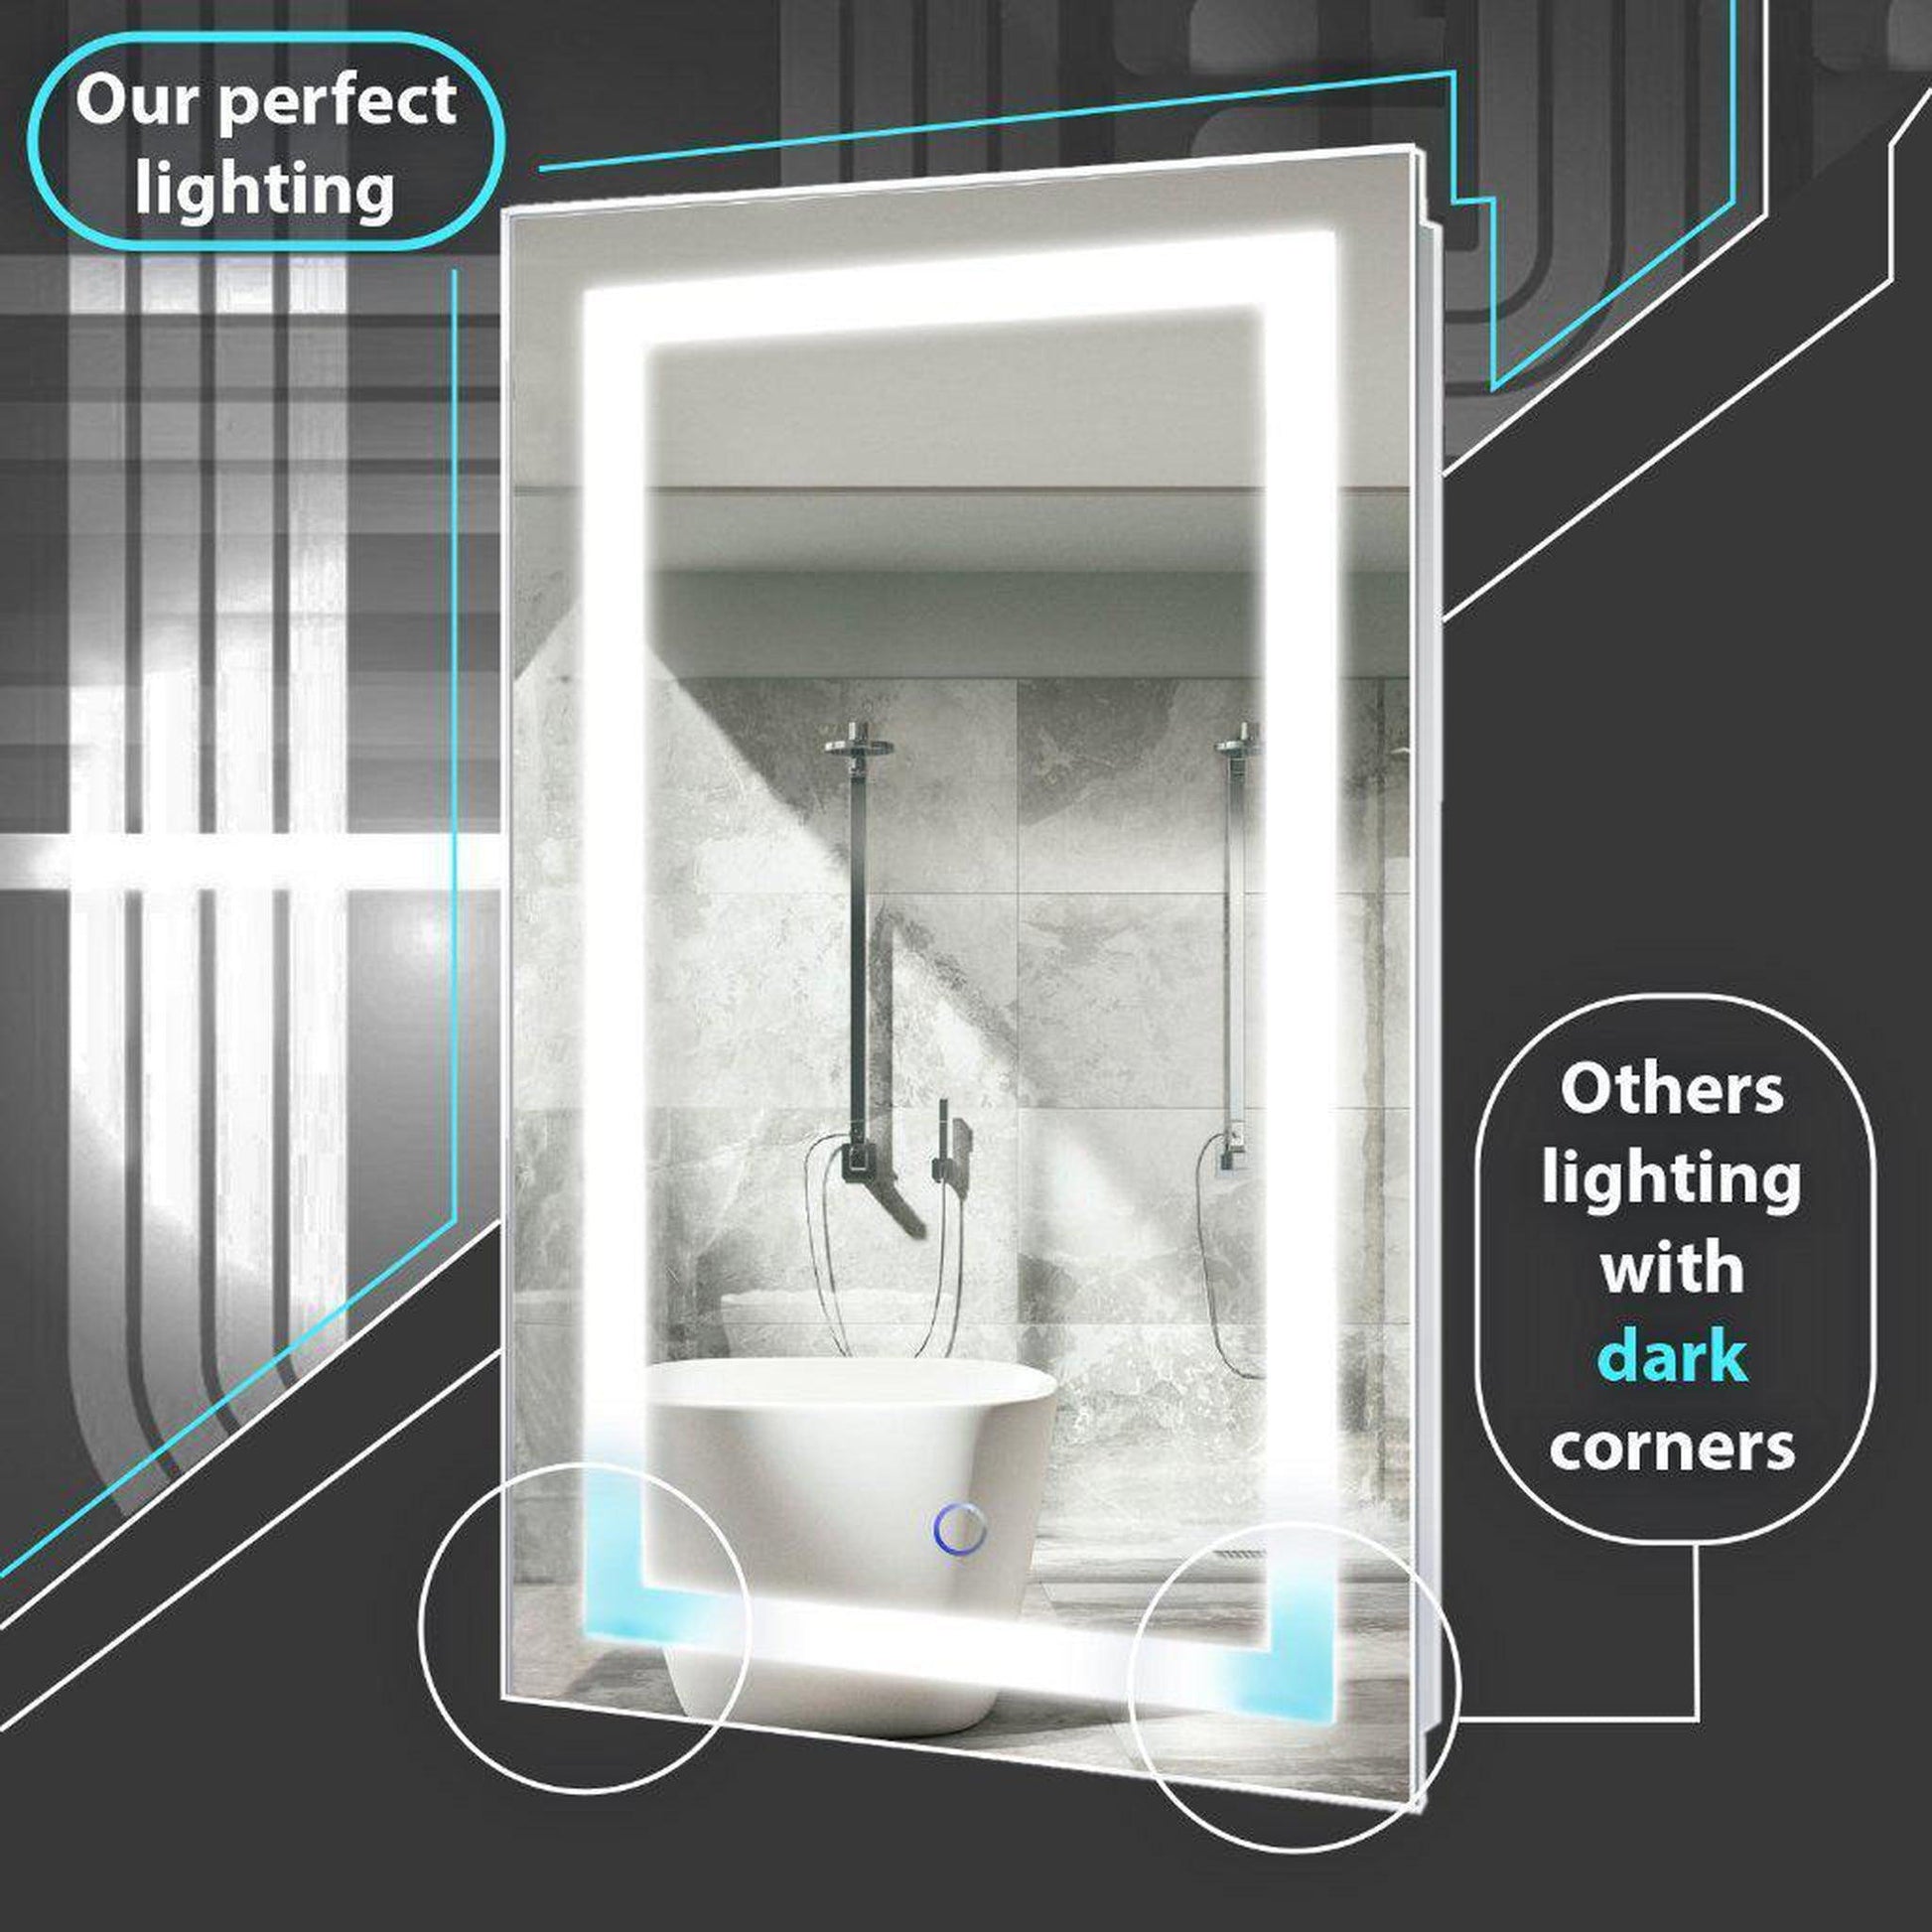 Krugg Reflections Svange 42" x 42" 5000K Single Bi-View Right Opening Recessed/Surface-Mount Illuminated Silver Backed LED Medicine Cabinet Mirror With Built-in Defogger, Dimmer and Electrical Outlet